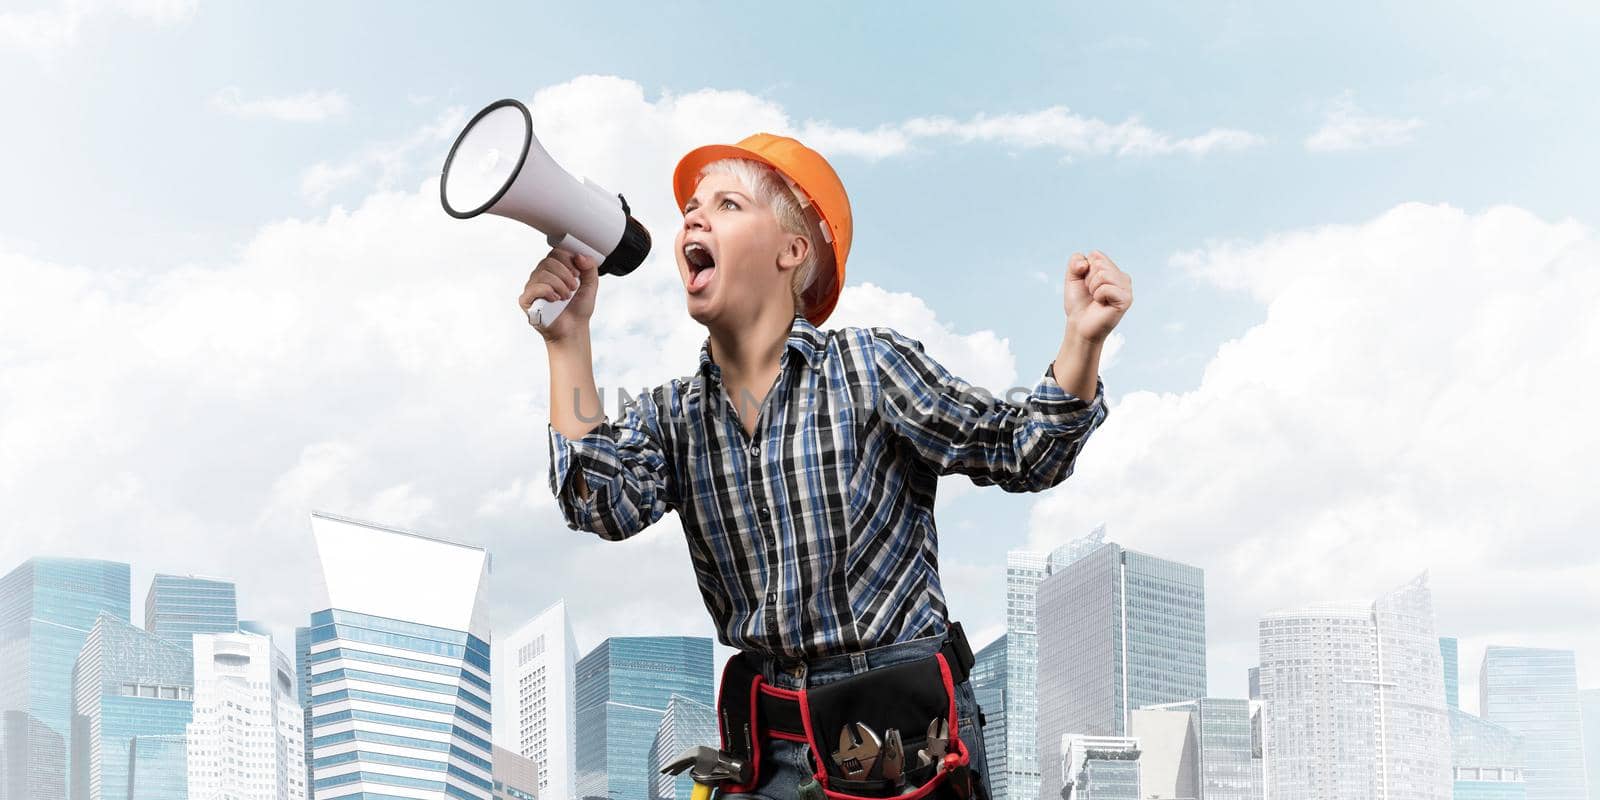 Expressive woman in safety helmet shouting into megaphone. Portrait of young emotional construction worker with loudspeaker on background of modern city. News announcement and advertisement.